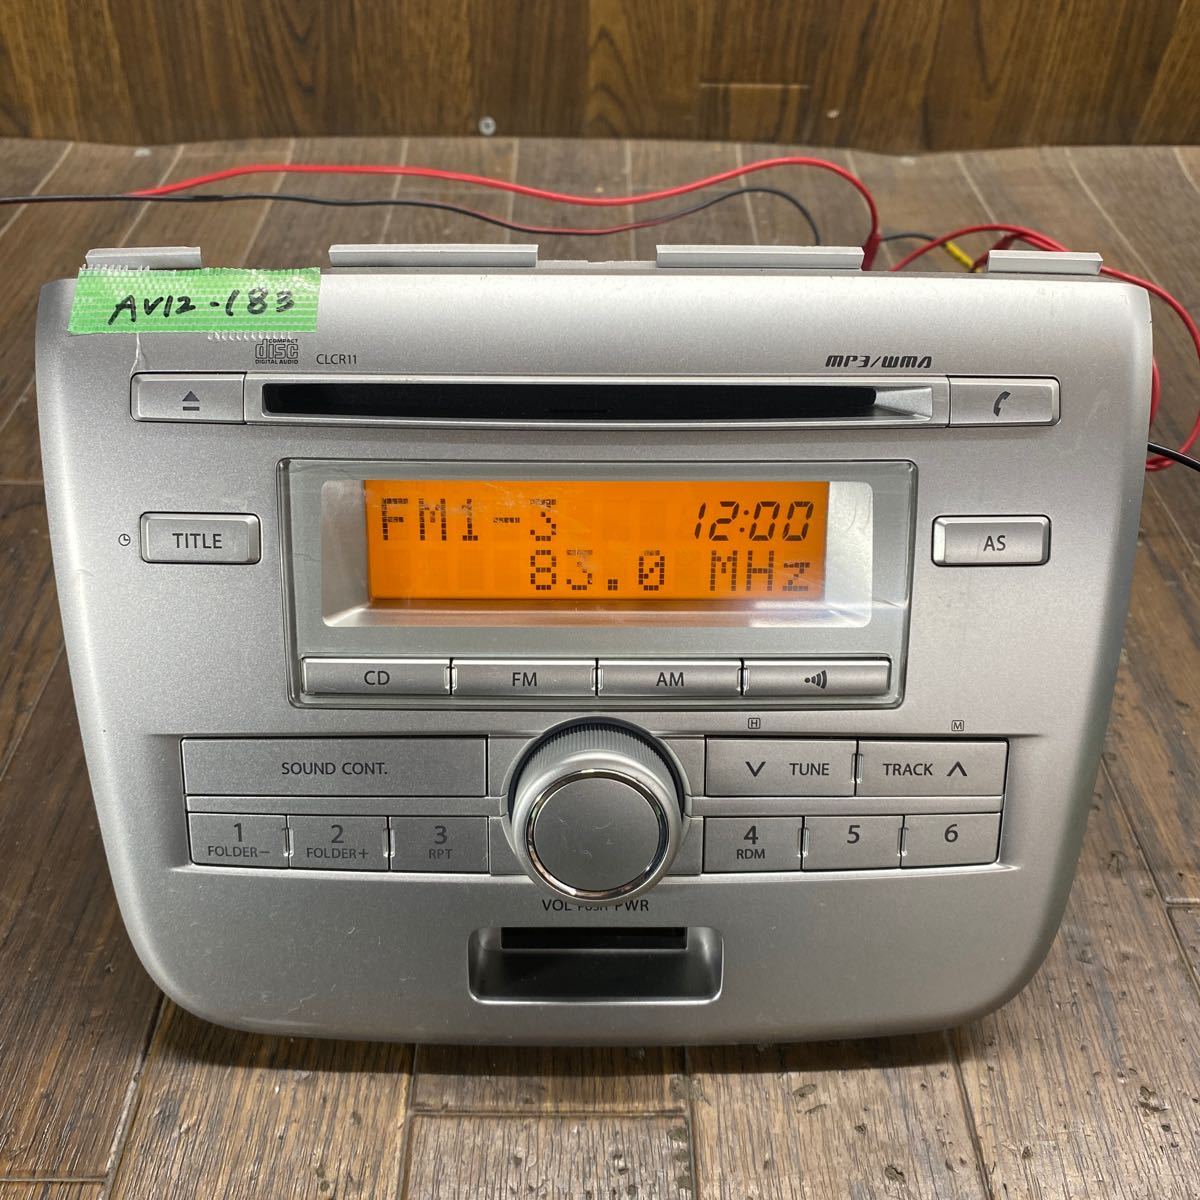 AV12-183 super-discount car stereo SUZUKI clarion PS-3075J-C 39101-70K02-ZML 0415486 CD AM/FM verification for wiring use simple operation verification ending used present condition goods 